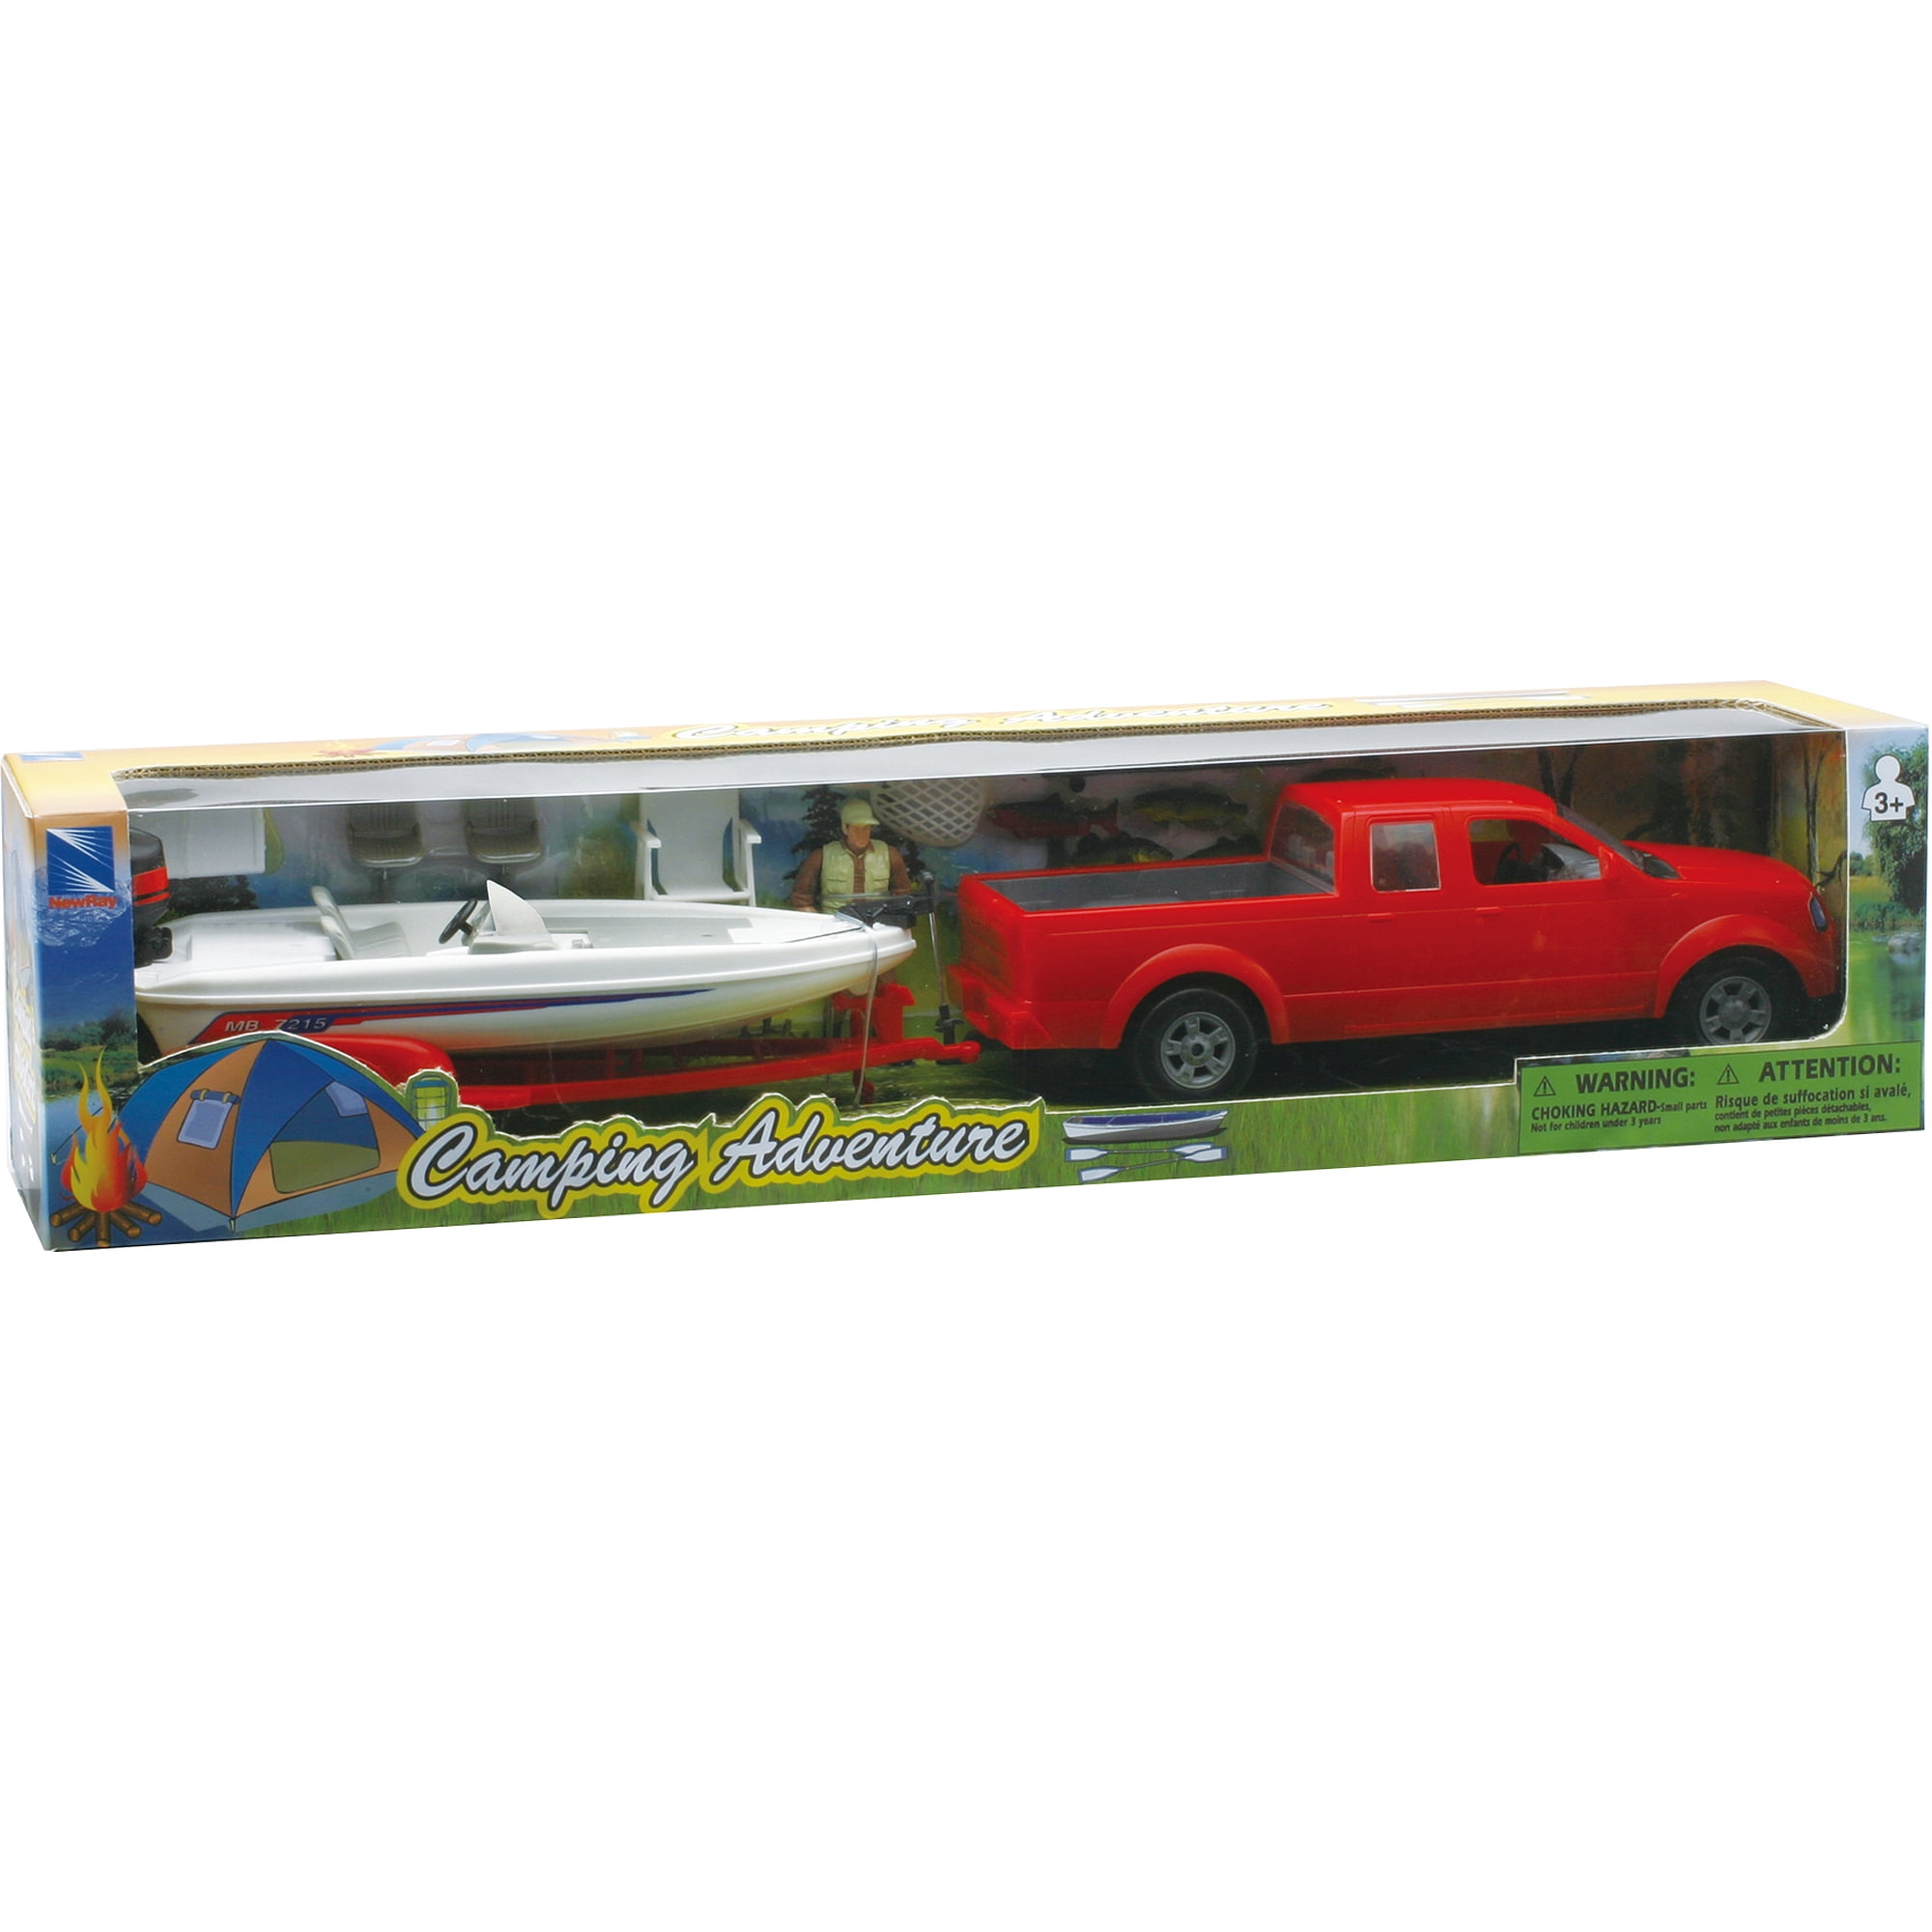 toy truck with boat